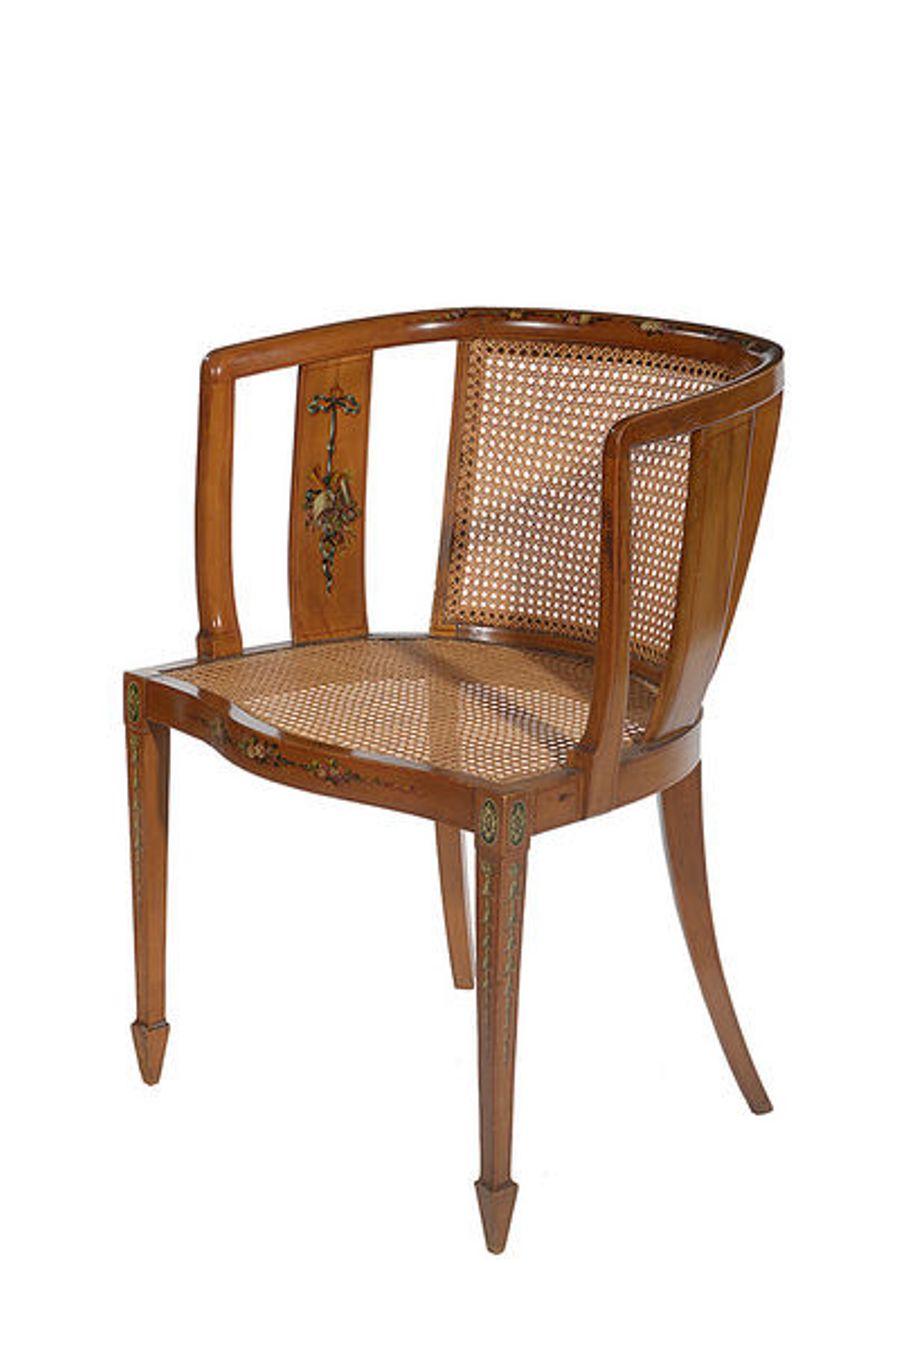 Sheraton Style Satinwood Occasional Chair with Painted Decoration For Sale 1